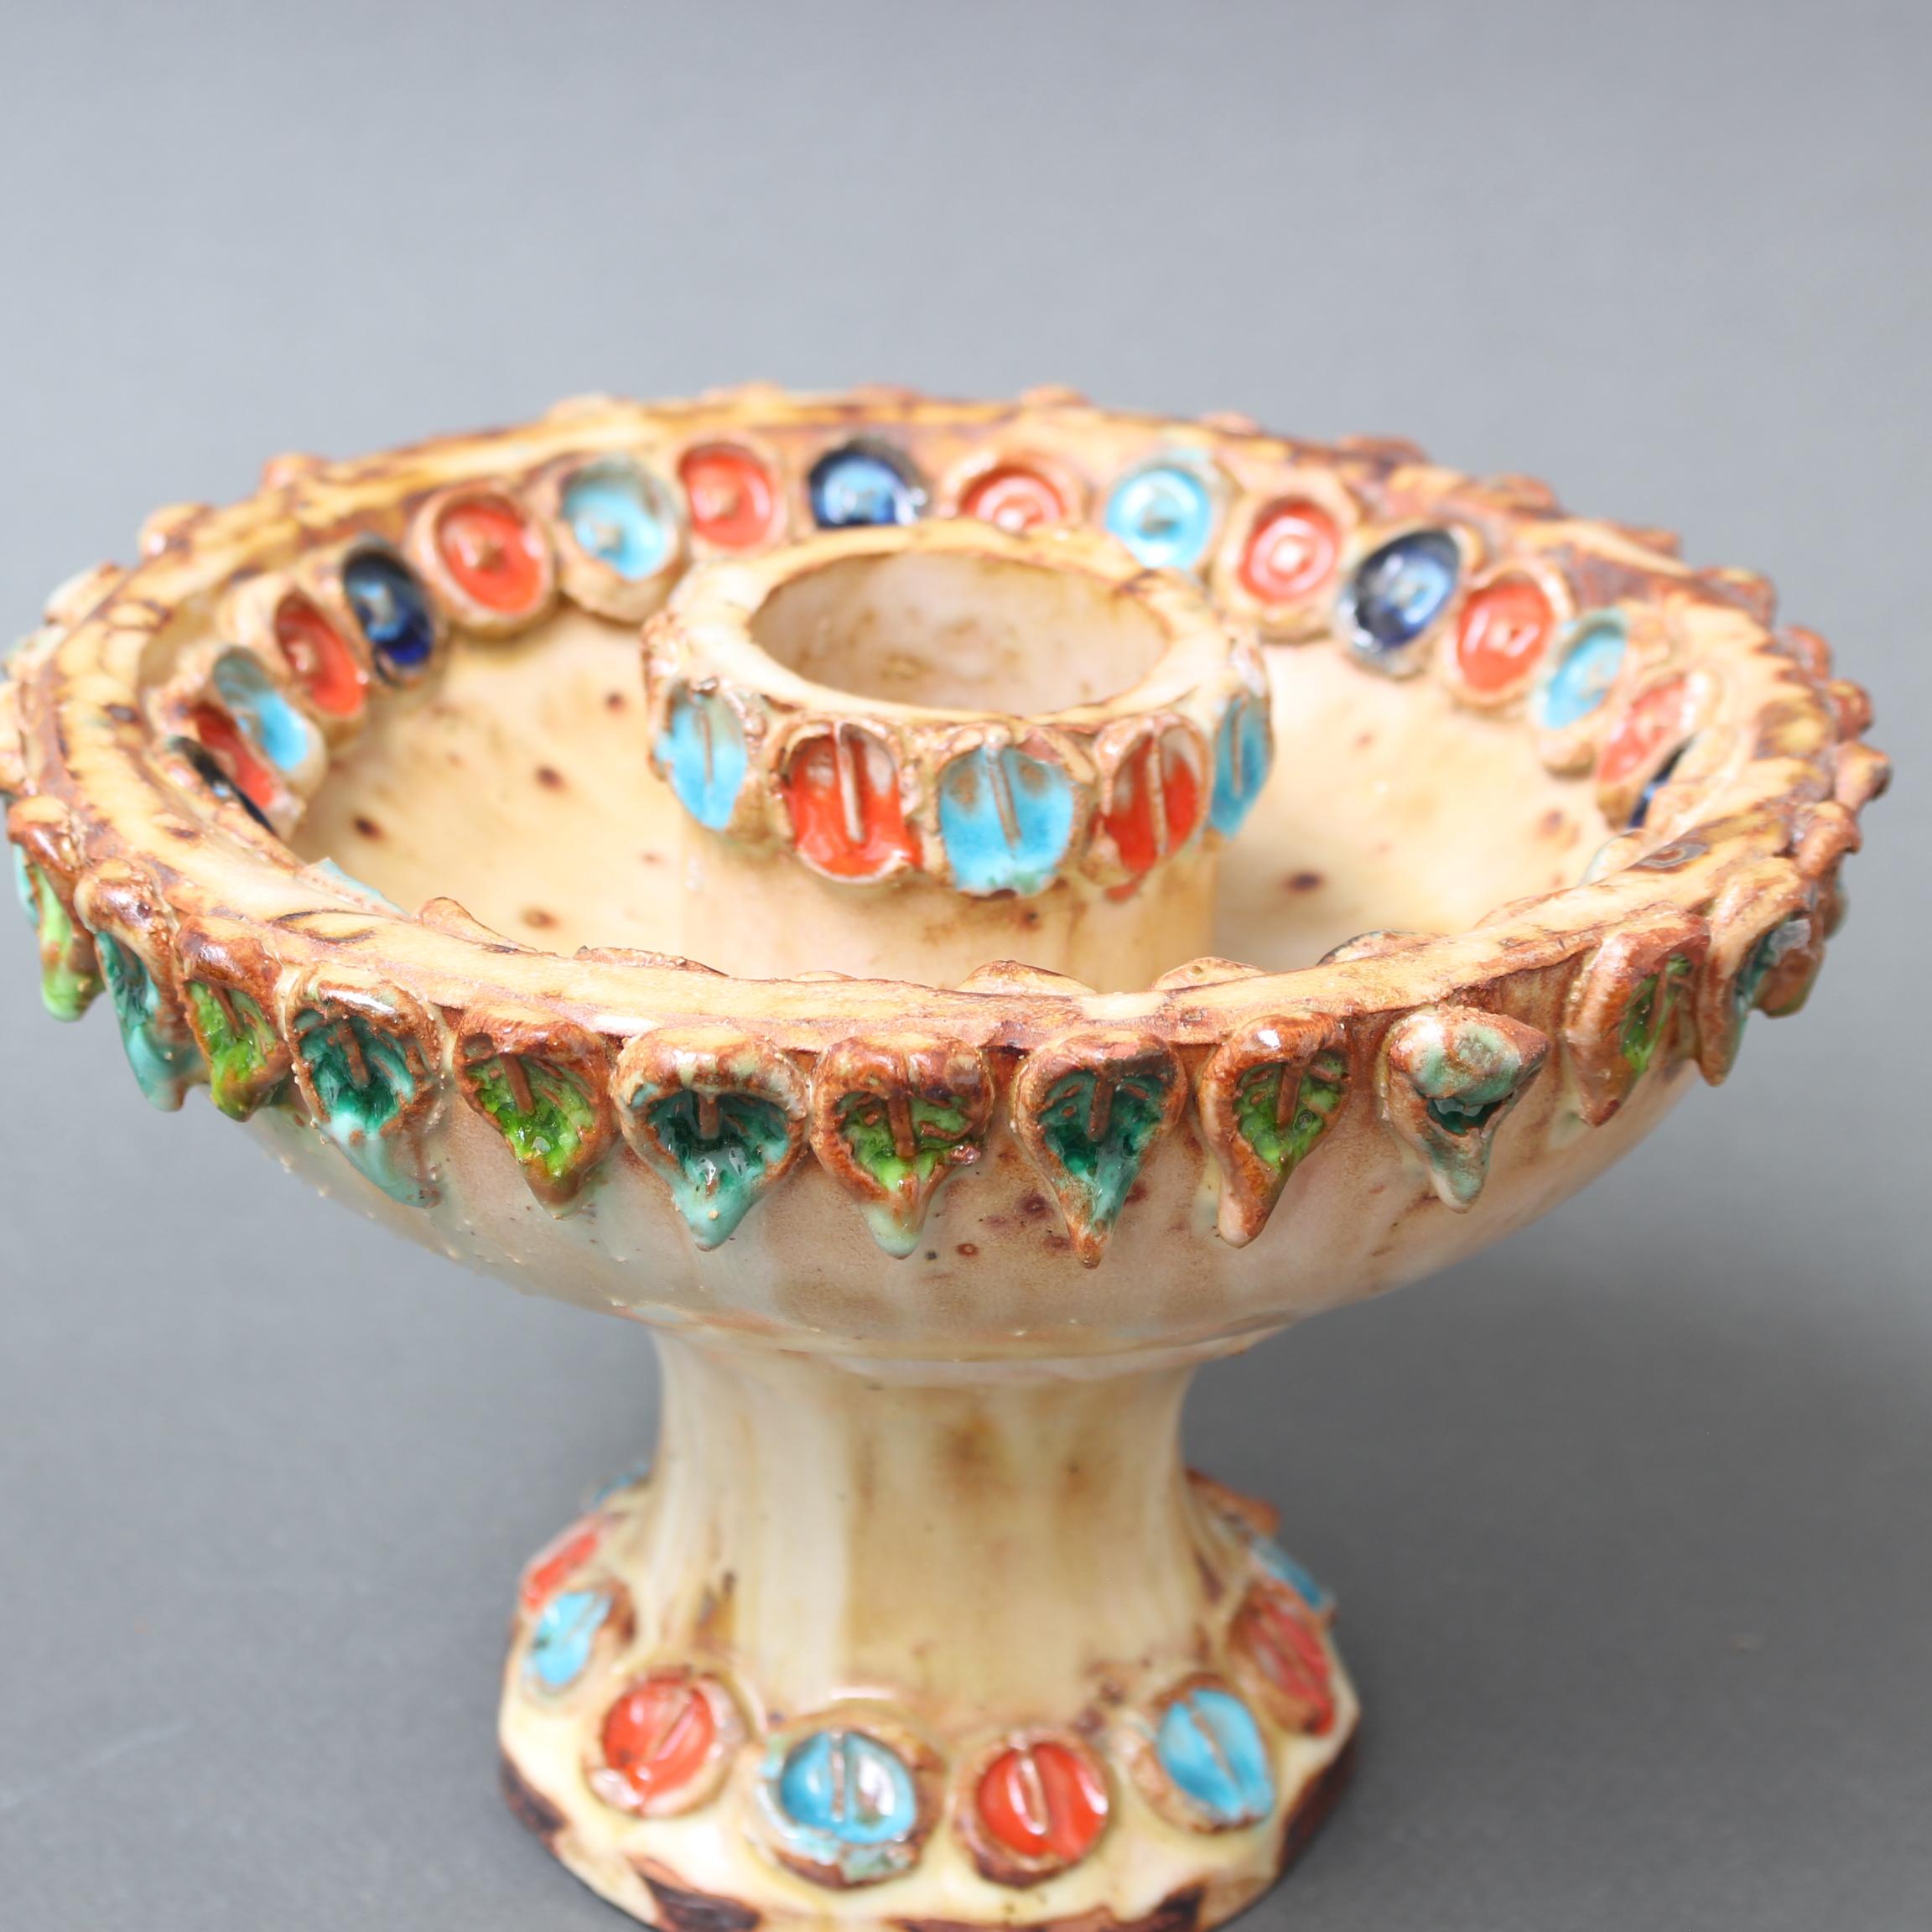 Vintage French Ceramic Candle-Holder by La Roue (circa 1960s) For Sale 7